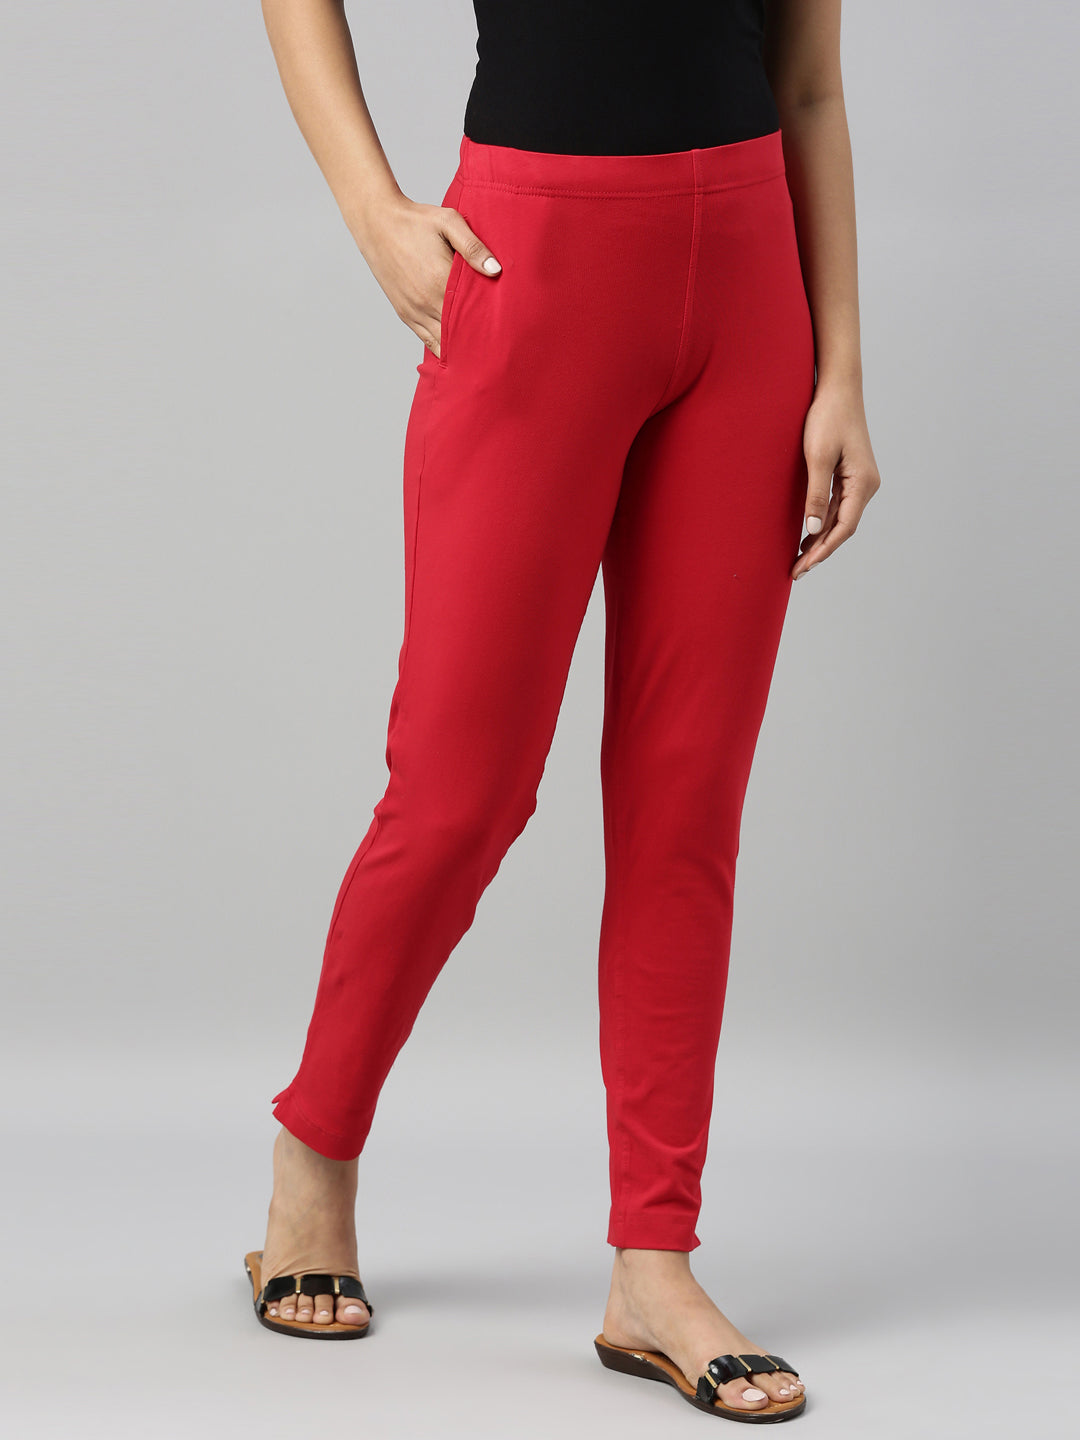 Metallic Pants in Erode at best price by Go Colors  Justdial